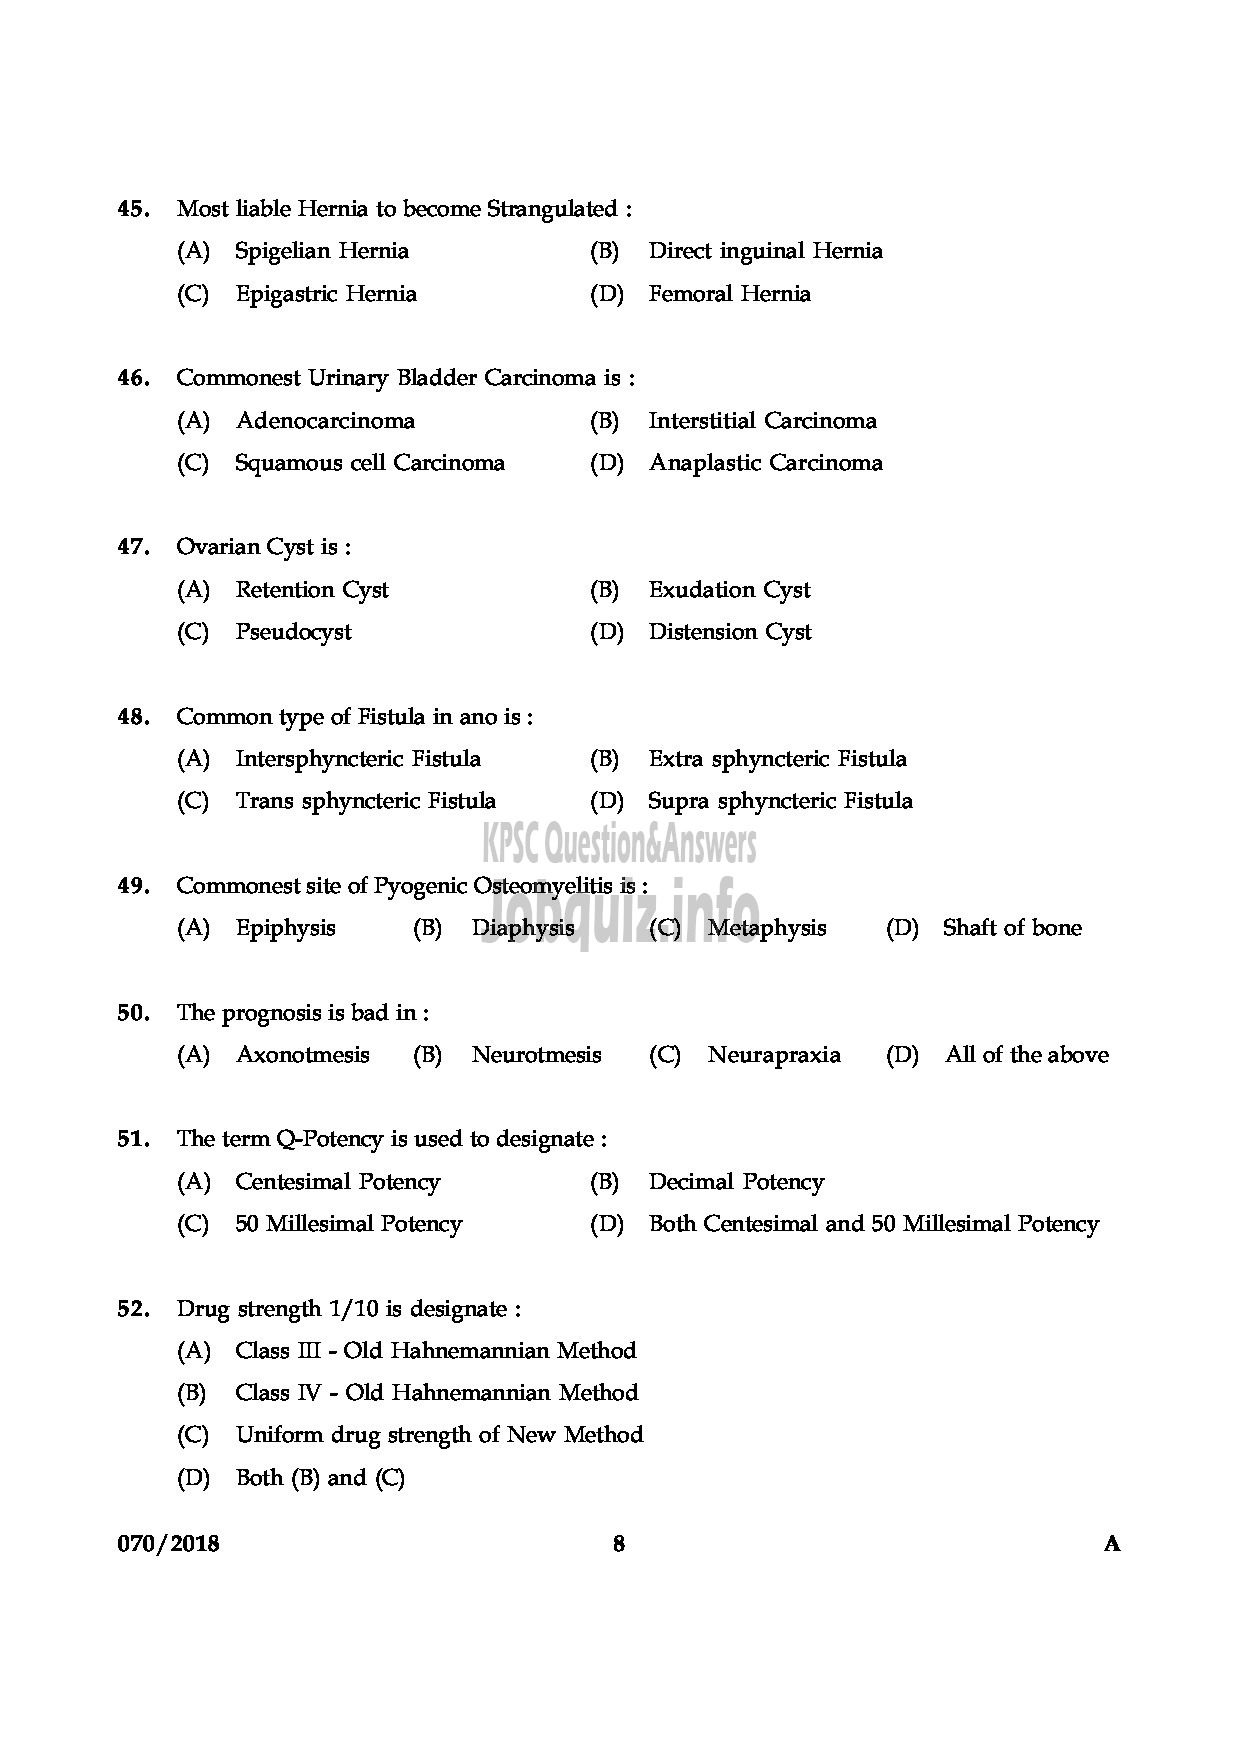 Kerala PSC Question Paper - MEDICAL OFFICER HOMOEO/ ASSISTANT INSURANCE MEDICAL OFFICER HOMOEO HOMOEOPATHY/ INSURANCE MEDICAL SERVICES-8